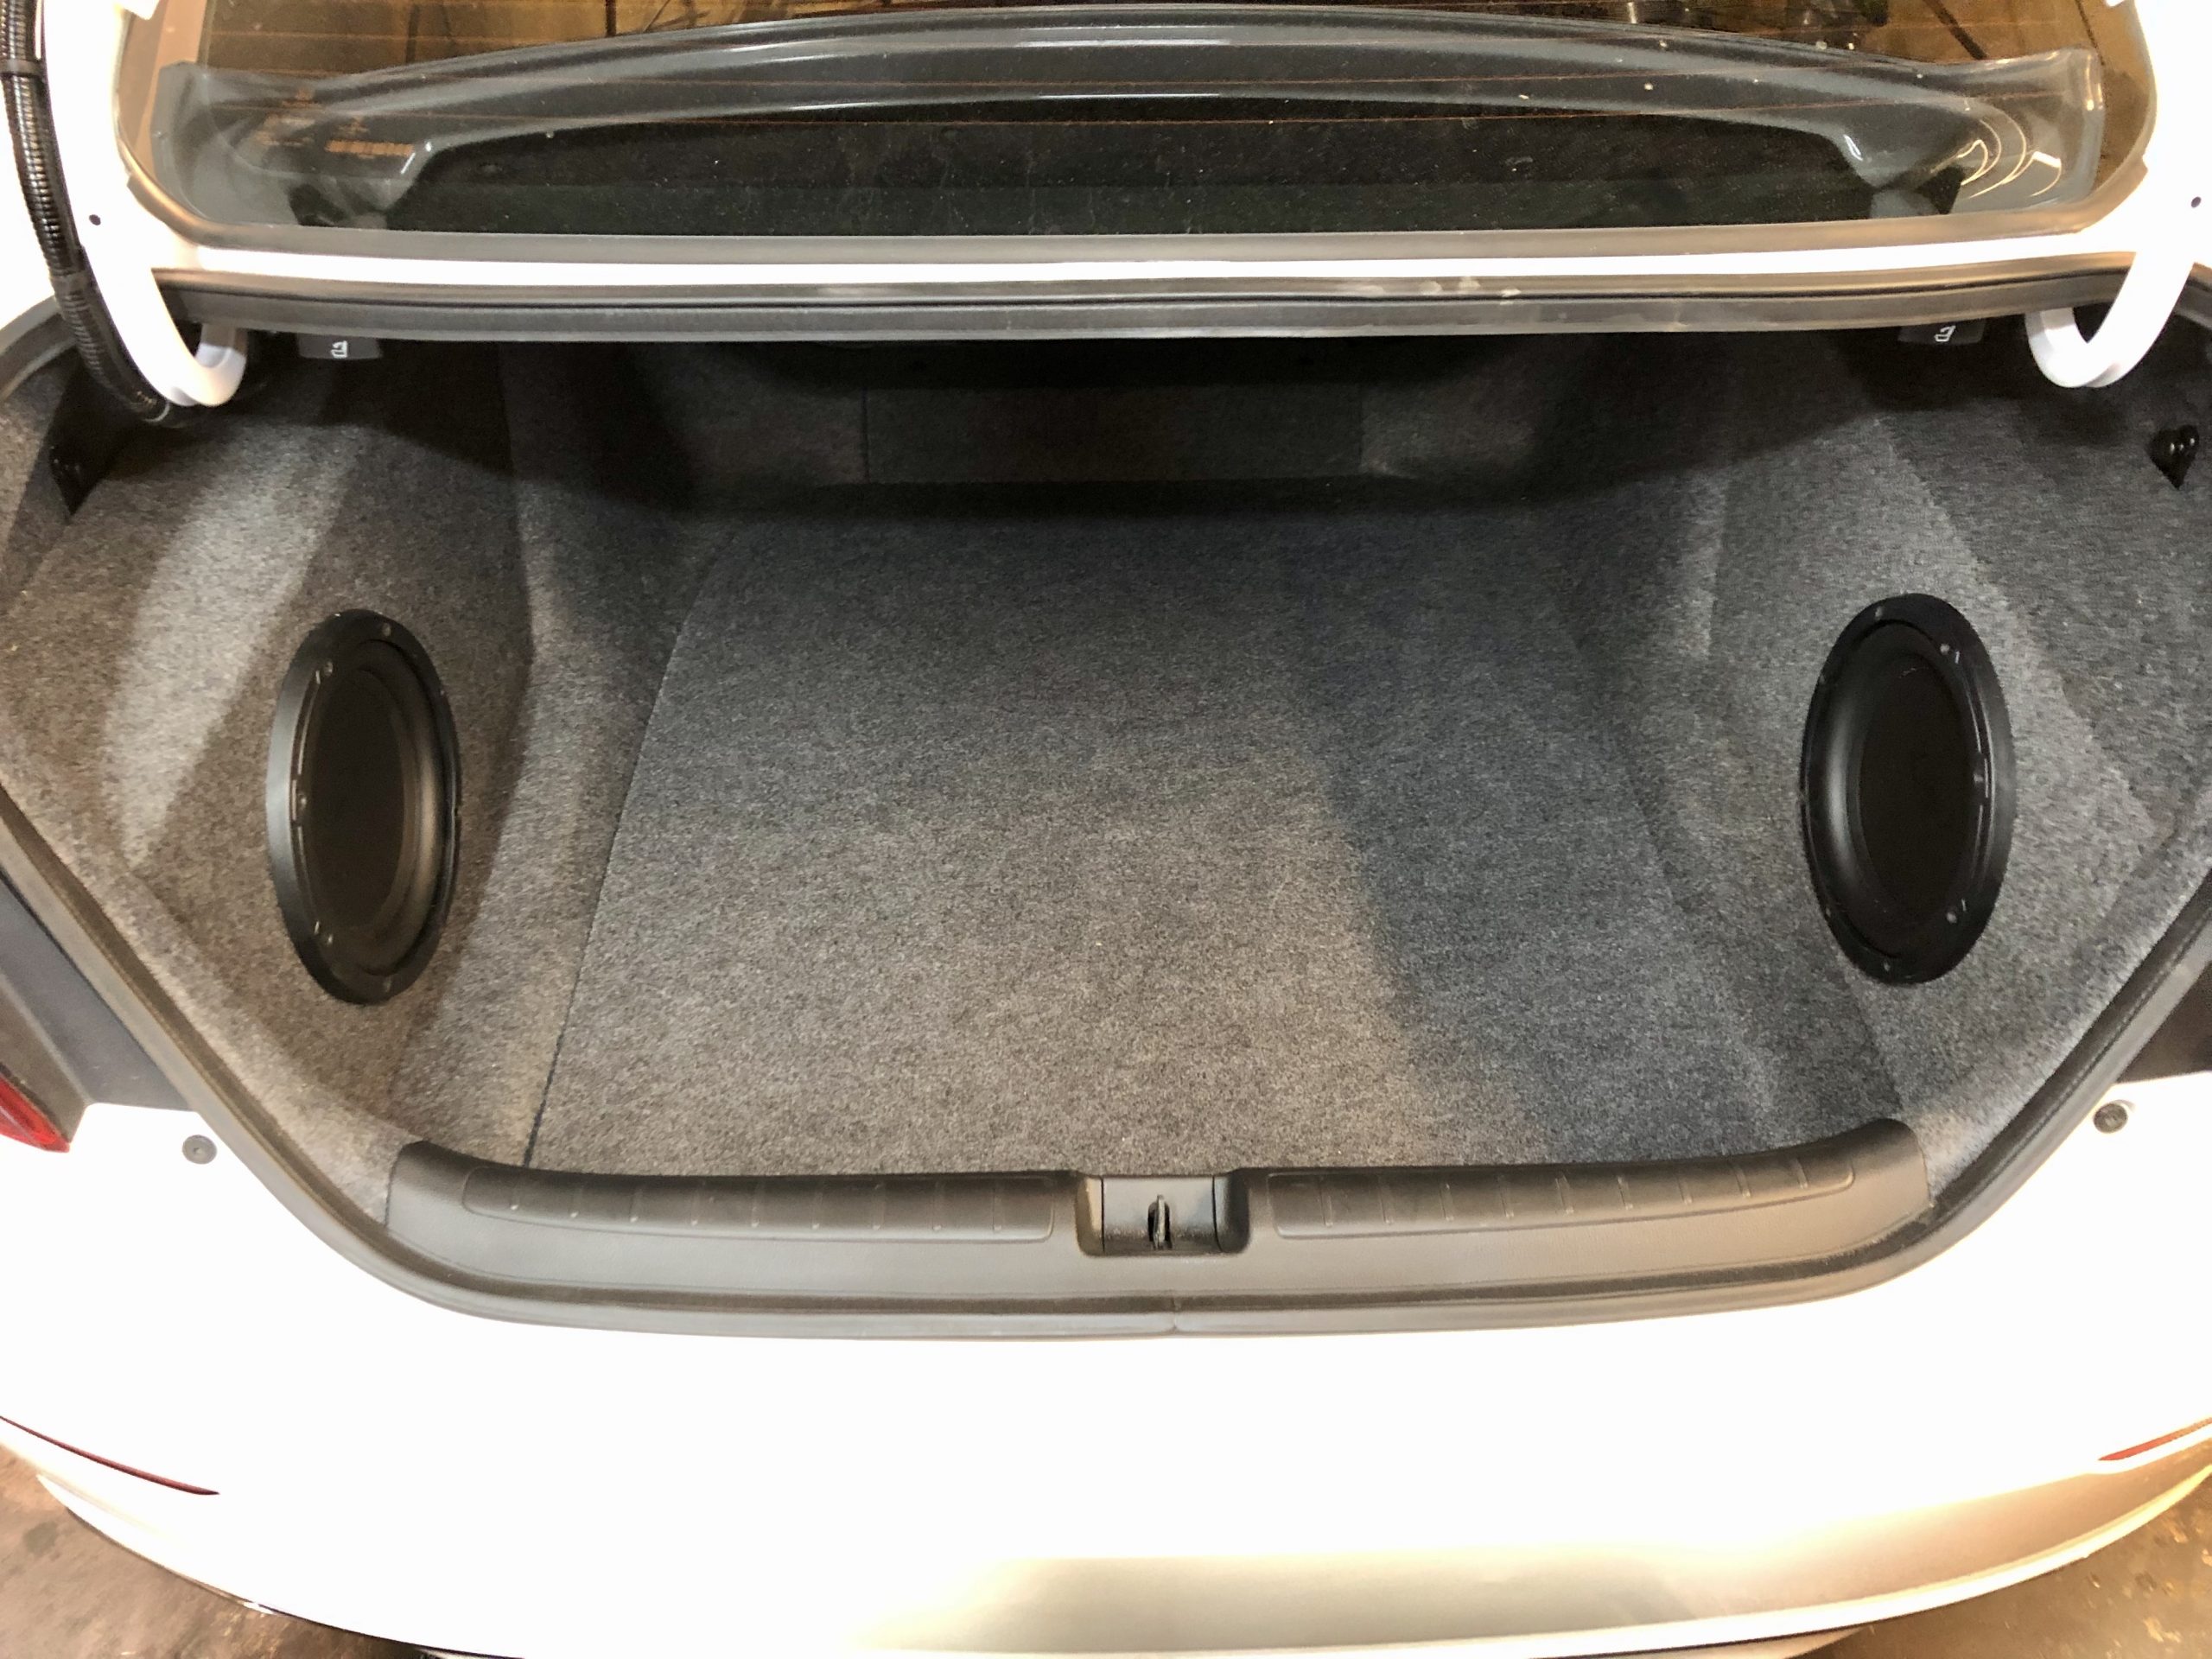 2018-up Accord Stealth Subwoofer Enclosure